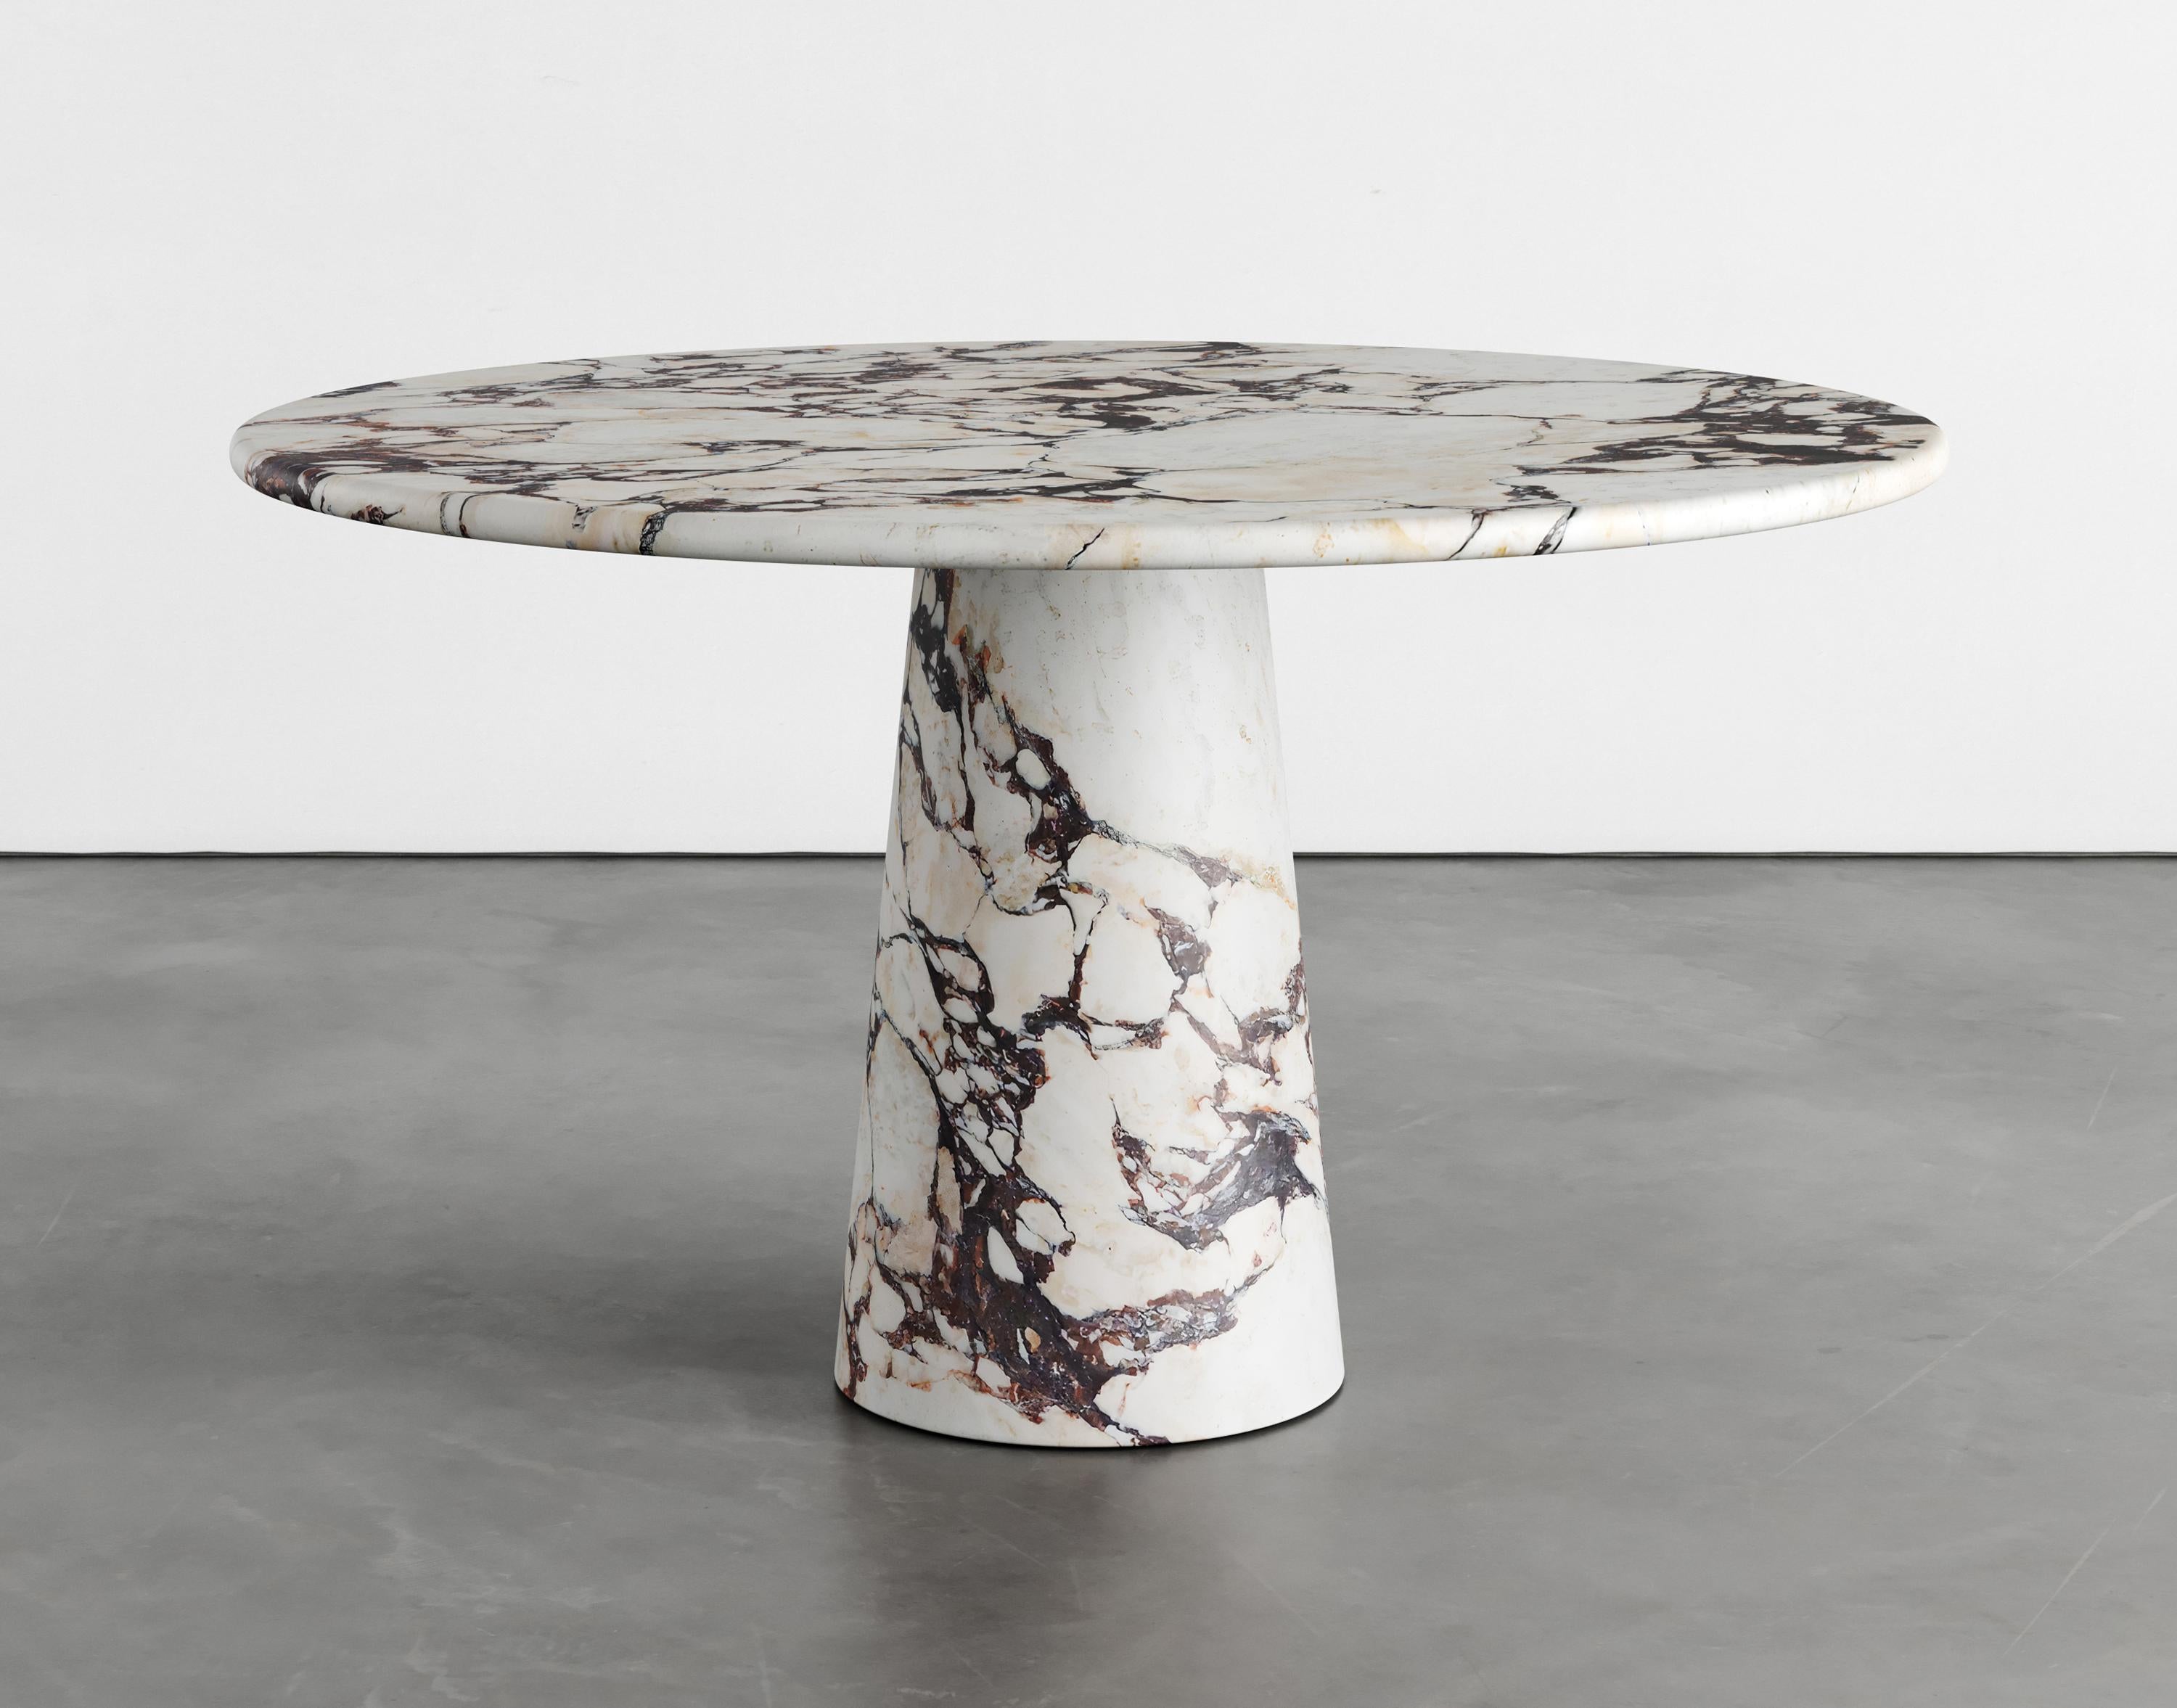 Giulia marble dining table by Agglomerati
Dimensions: D 130 x H 75 cm
Materials: Calacatta Viola marble
Available in other stones.

Giulia Dining Table has a refined, splayed central column. Its simplistic form allows the texture of the stone